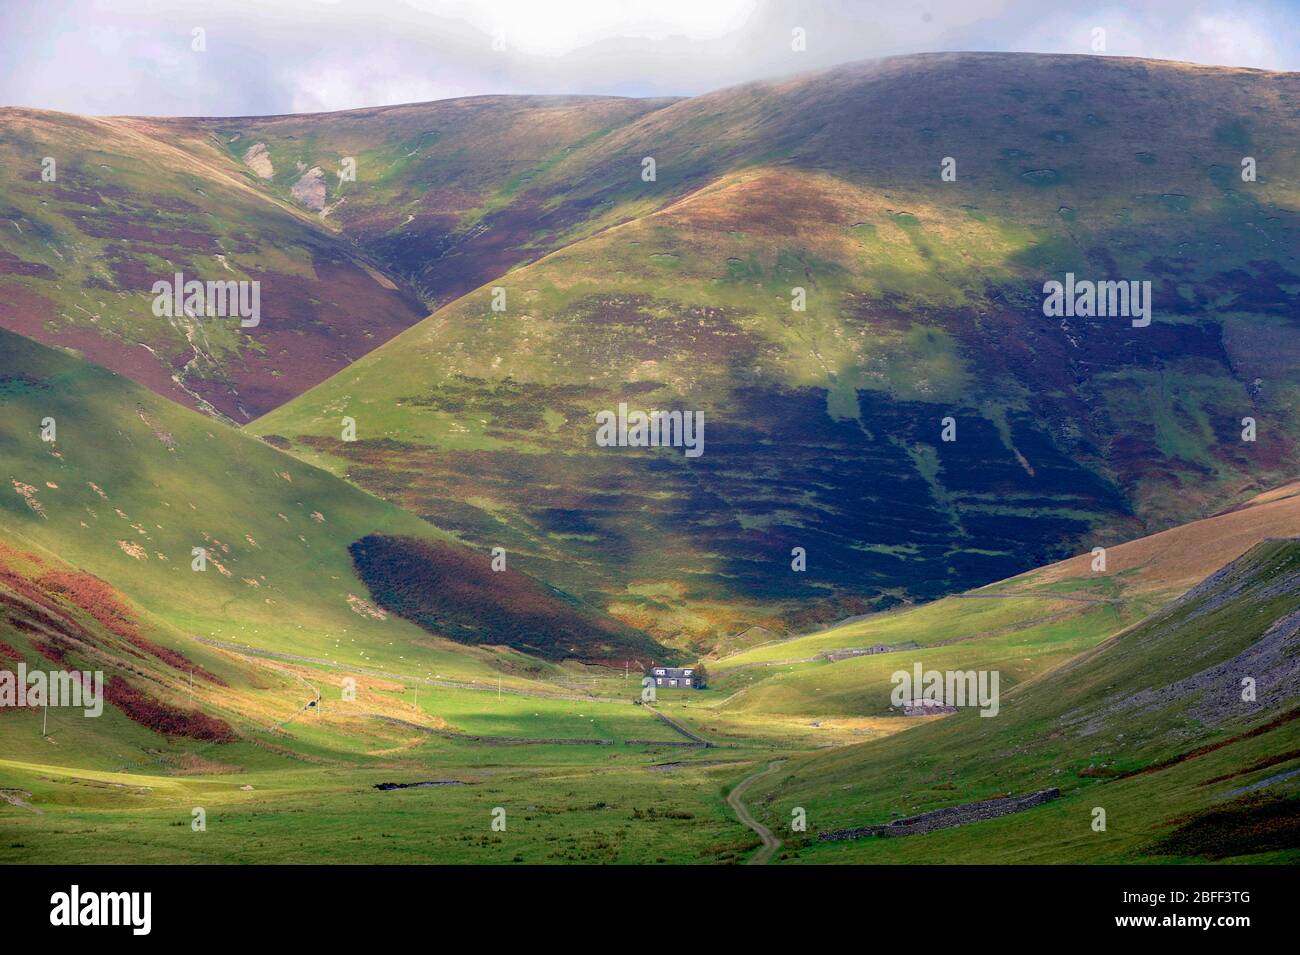 The Dalveen Pass in the Lowther Hills, Dumfries & Galloway, Scotland Stock Photo